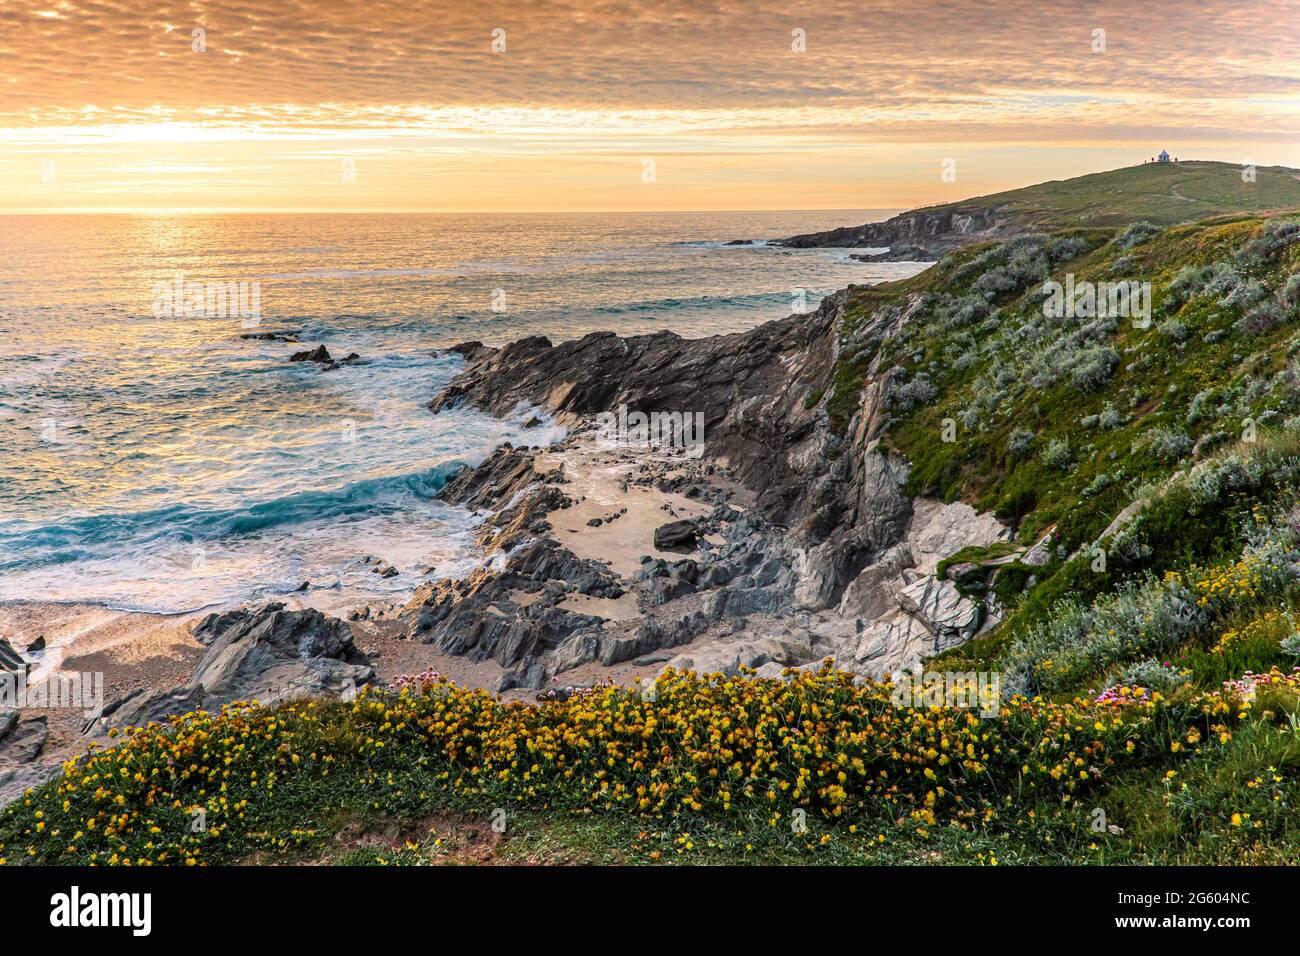 A spectacular sunset over the Celtic Sea seen from the coast of Newquay in Cornwall. Stock Photo